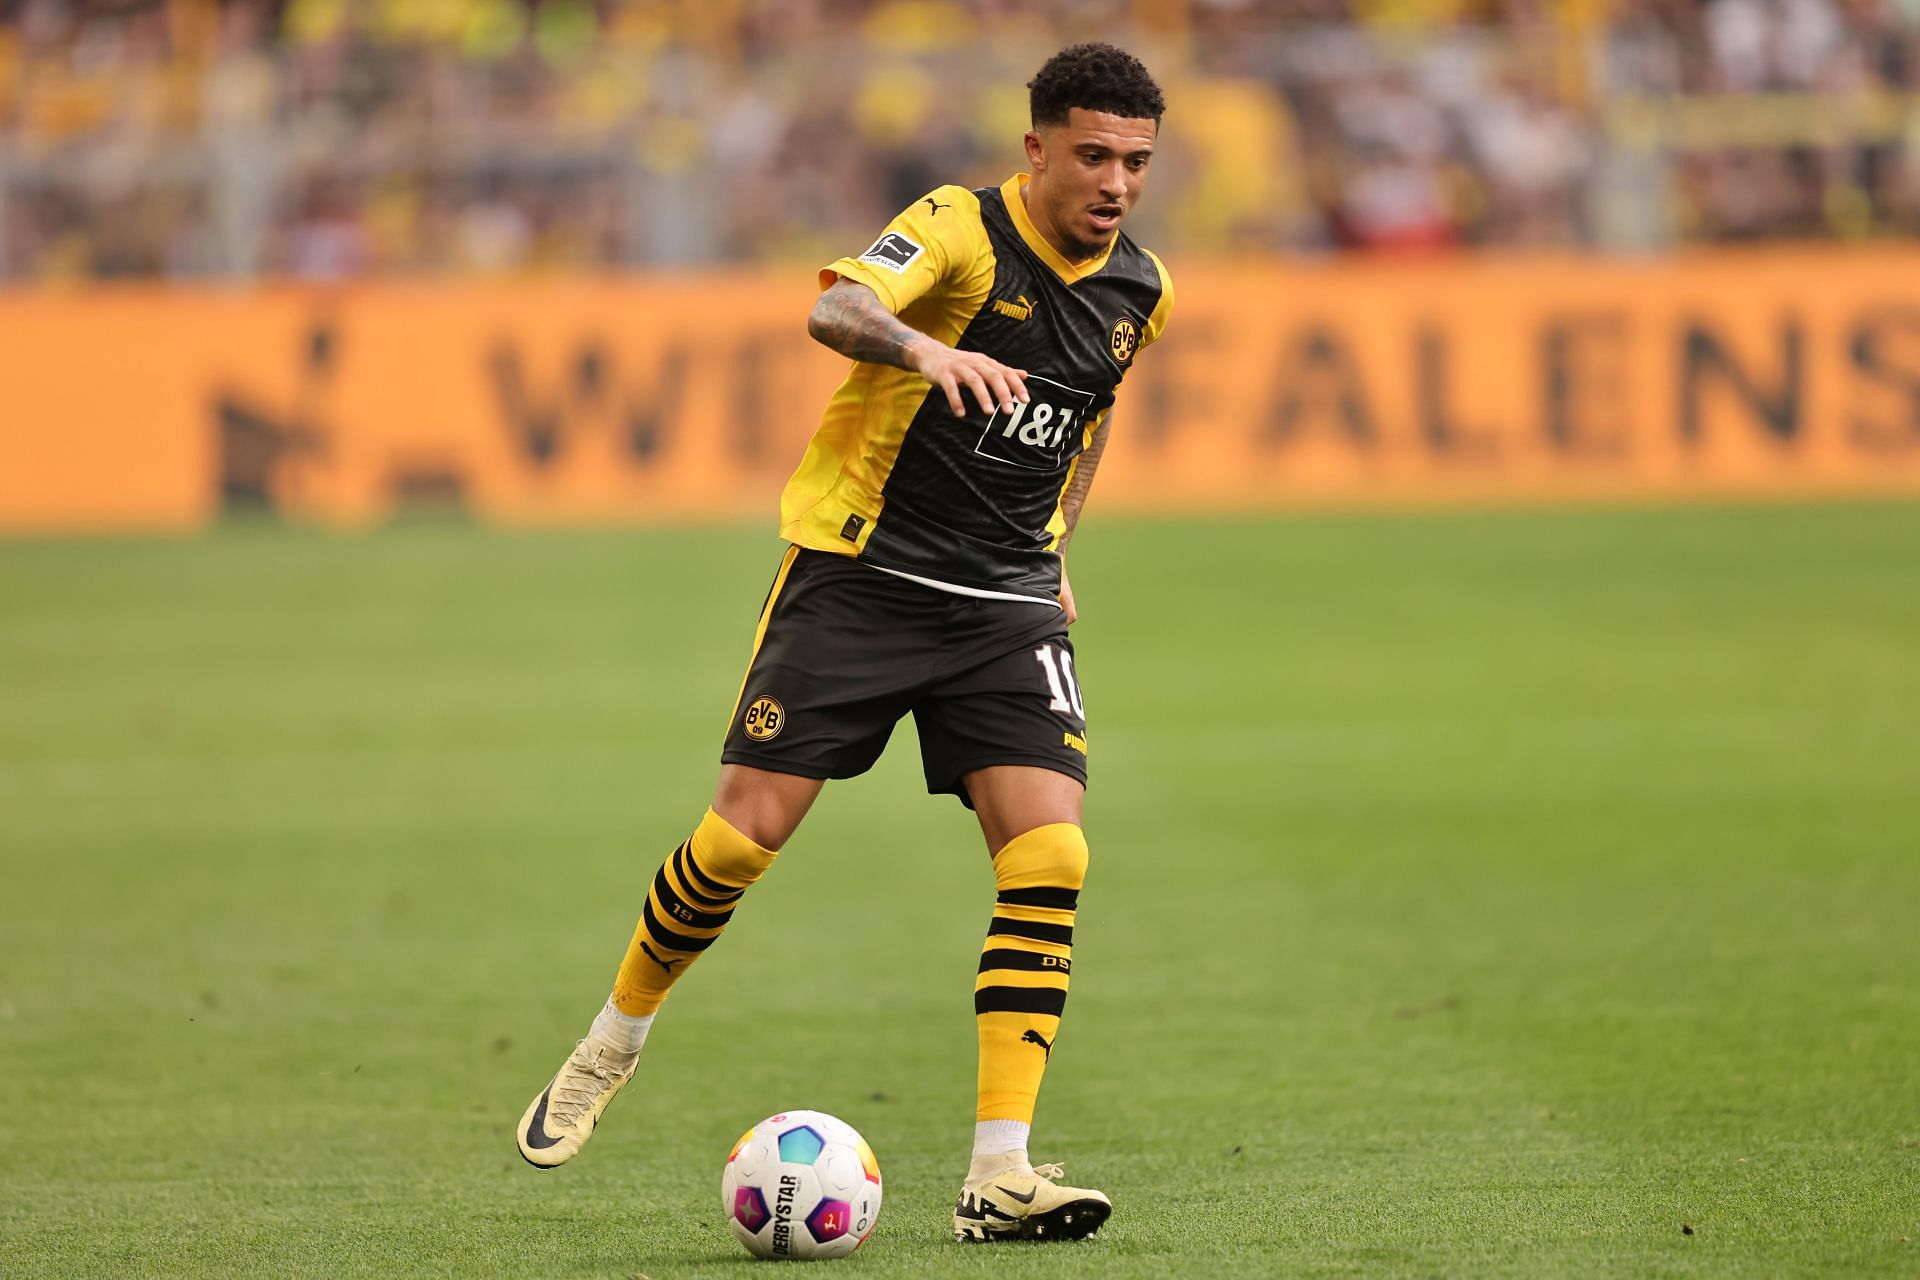 Jadon Sancho is likely to leave Old Trafford this summer